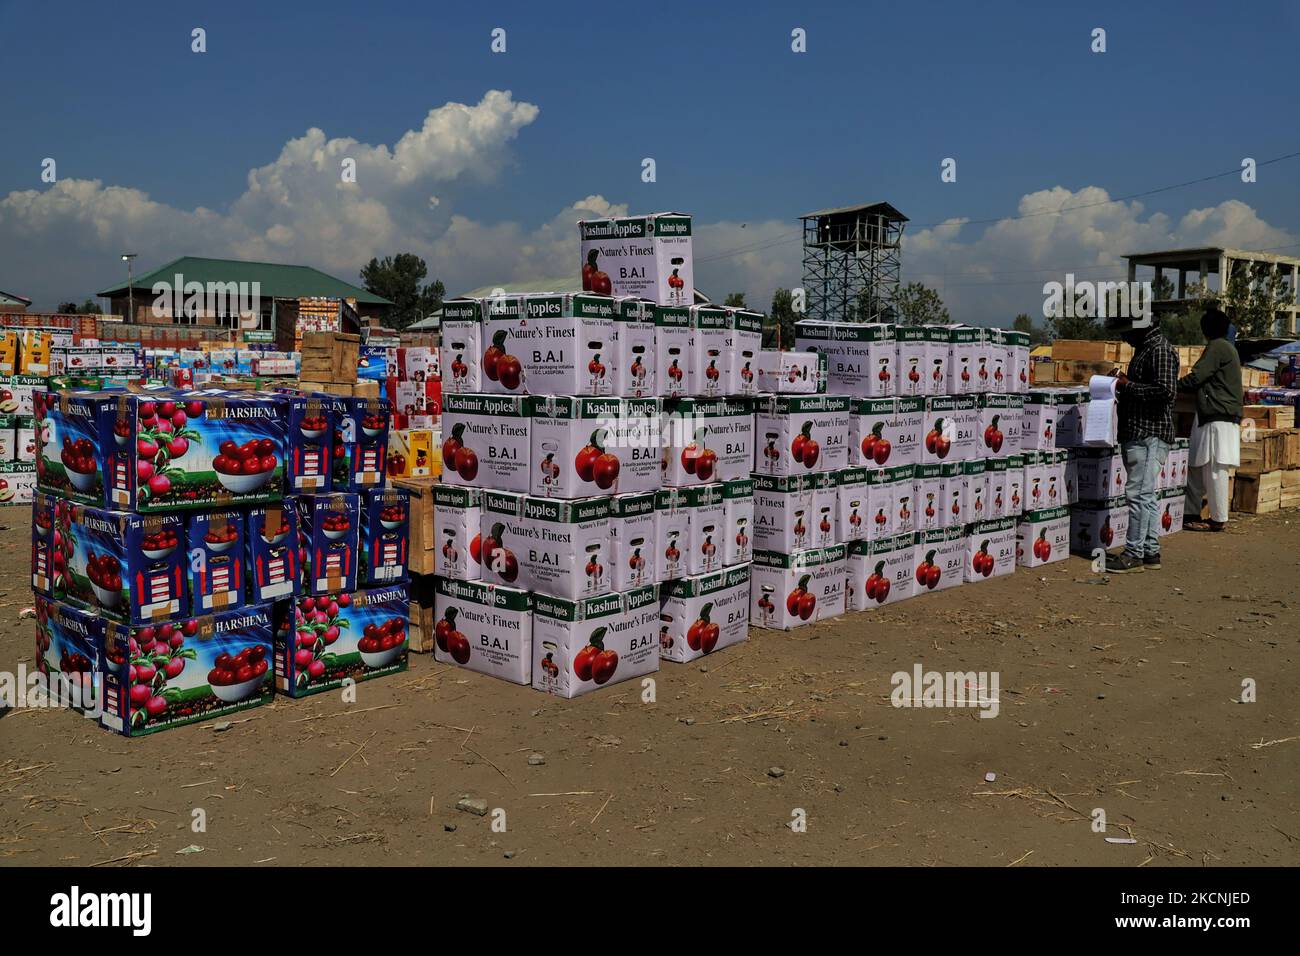 A Trader is seen near the Apple boxes at Fruit mandi in Sopore, District baramulla, Jammu and Kashmir, India on 28 September 2021. Jammu & Kashmir boasts of around 80% share of total apple produced in the country.Â Apple cultivation and its value chain is one of the main stays of rural economy with revenue of around Rs. 1500 crores.Â The apple production is predominantly confined to districts of Srinagar, Ganderbal, Budgam, Baramulla, Kupwara, Anantnag and Shopian in Kashmir province. (Photo by Nasir Kachroo/NurPhoto) Stock Photo